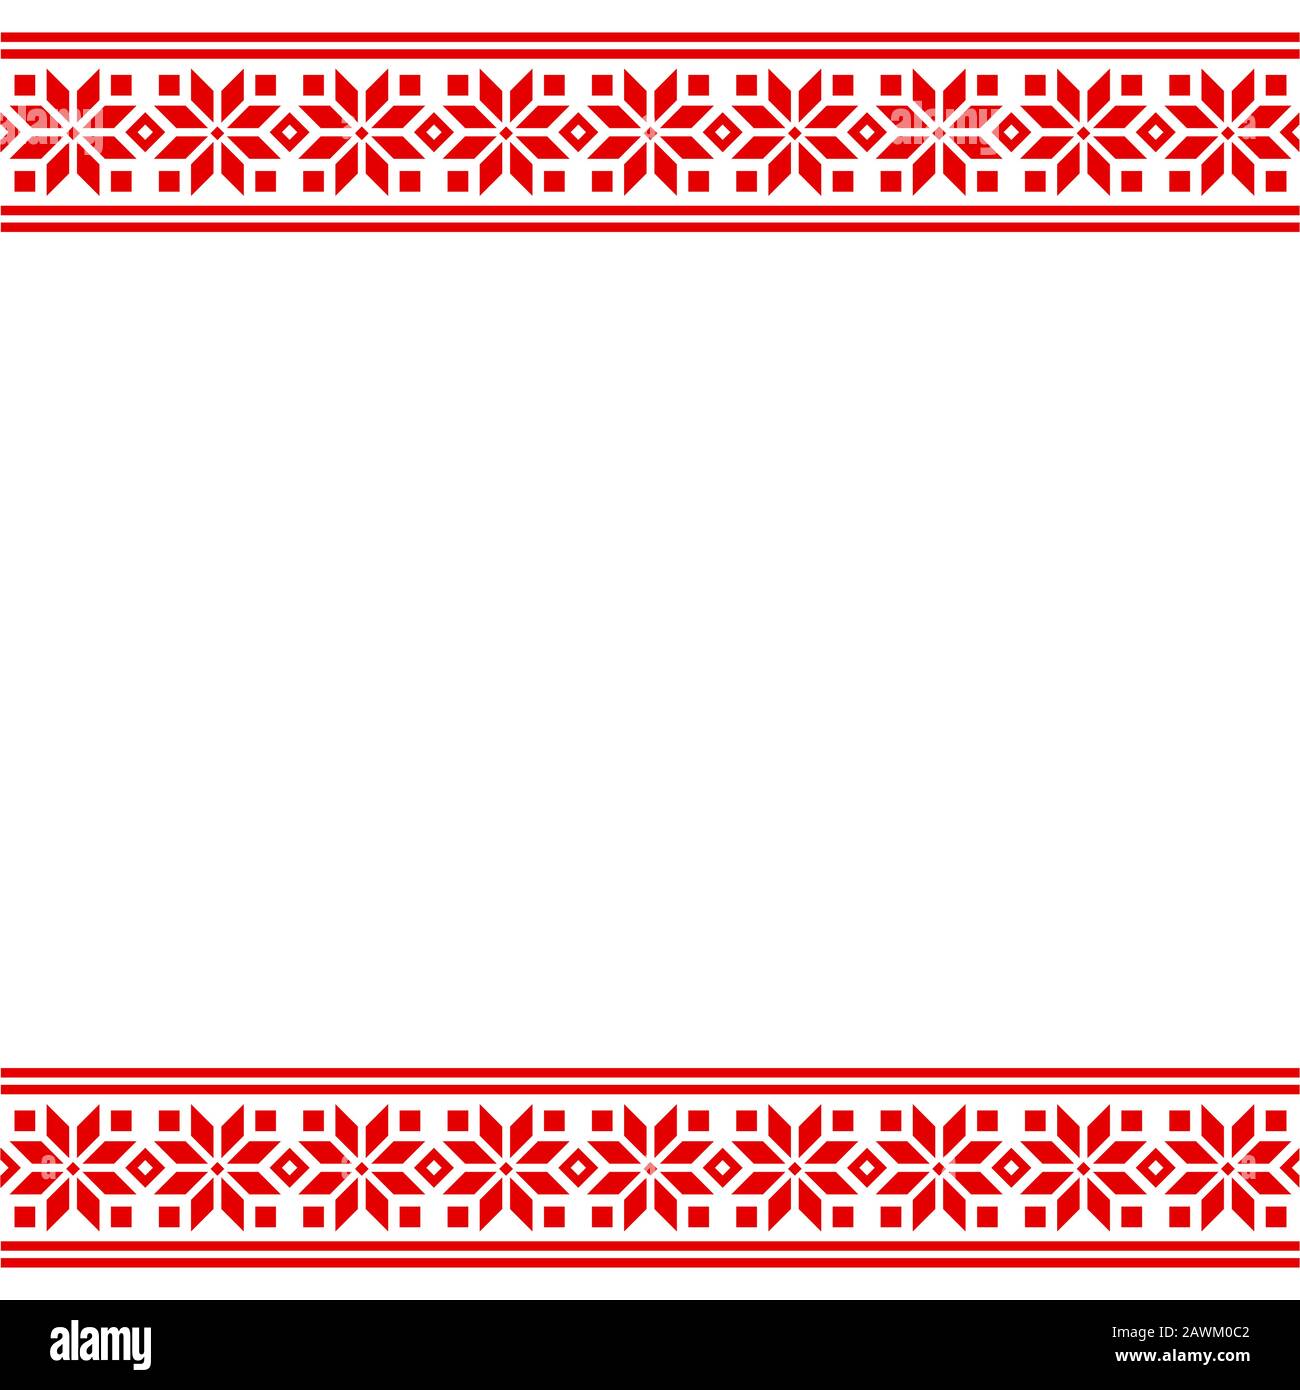 beautiful red and white borders